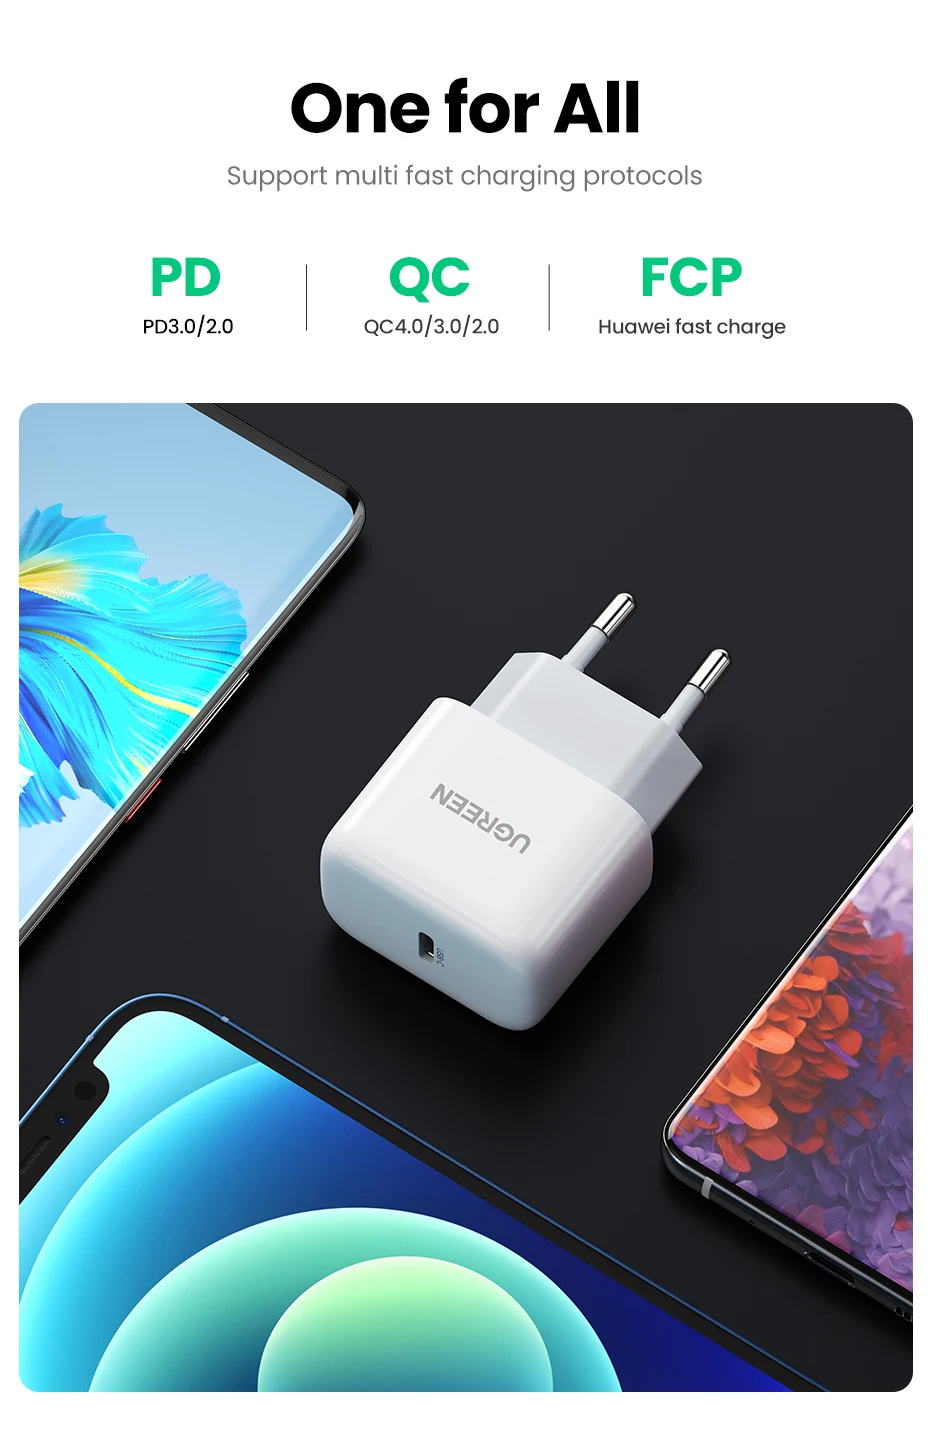 usb car charge UGREEN USB Type C Charger 20W PD Fast Charger for iPhone 13 12 8 Quick Charge 4.0 30 Phone Charger for Xiaomi Huawei PD Charger mobile phone chargers